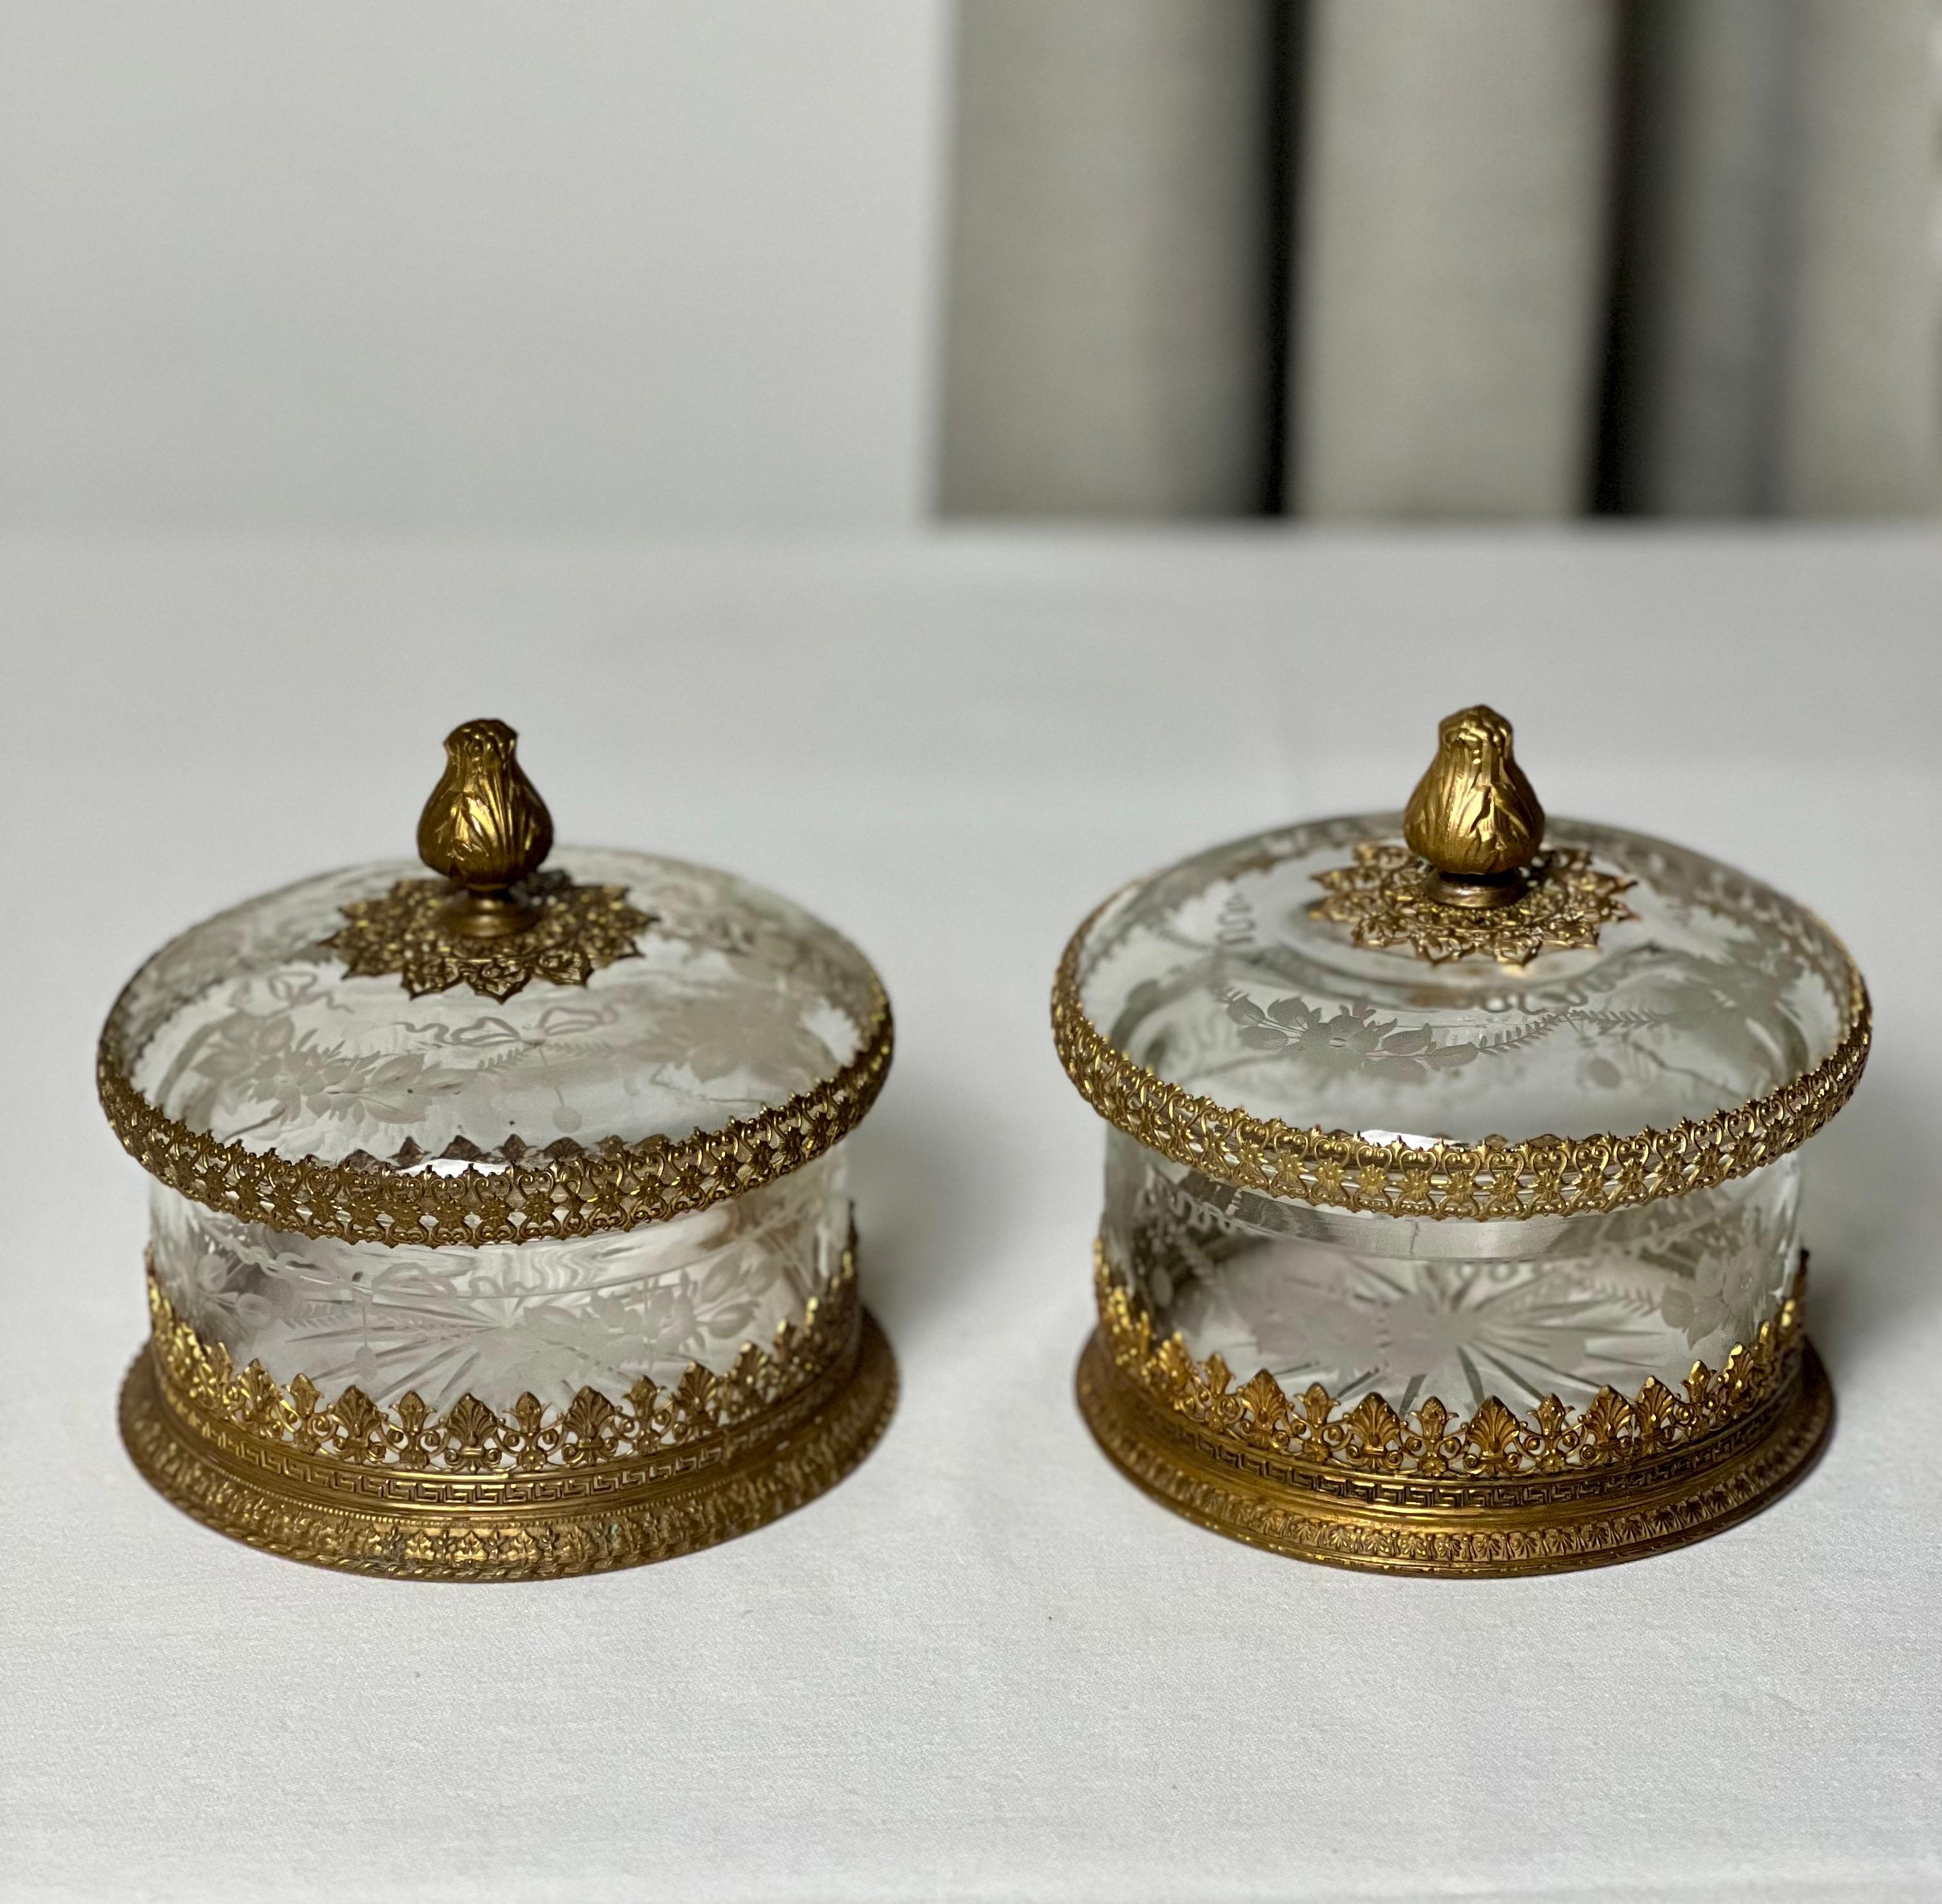 Pair of French antique etched and faceted cut crystal lidded boxes with ormolu mounts, c. early 20th century.

Gorgeous gilt bronze mounted boxes with intricately etched crystal of flowing floral swag and bow detail with a faceted cut starburst